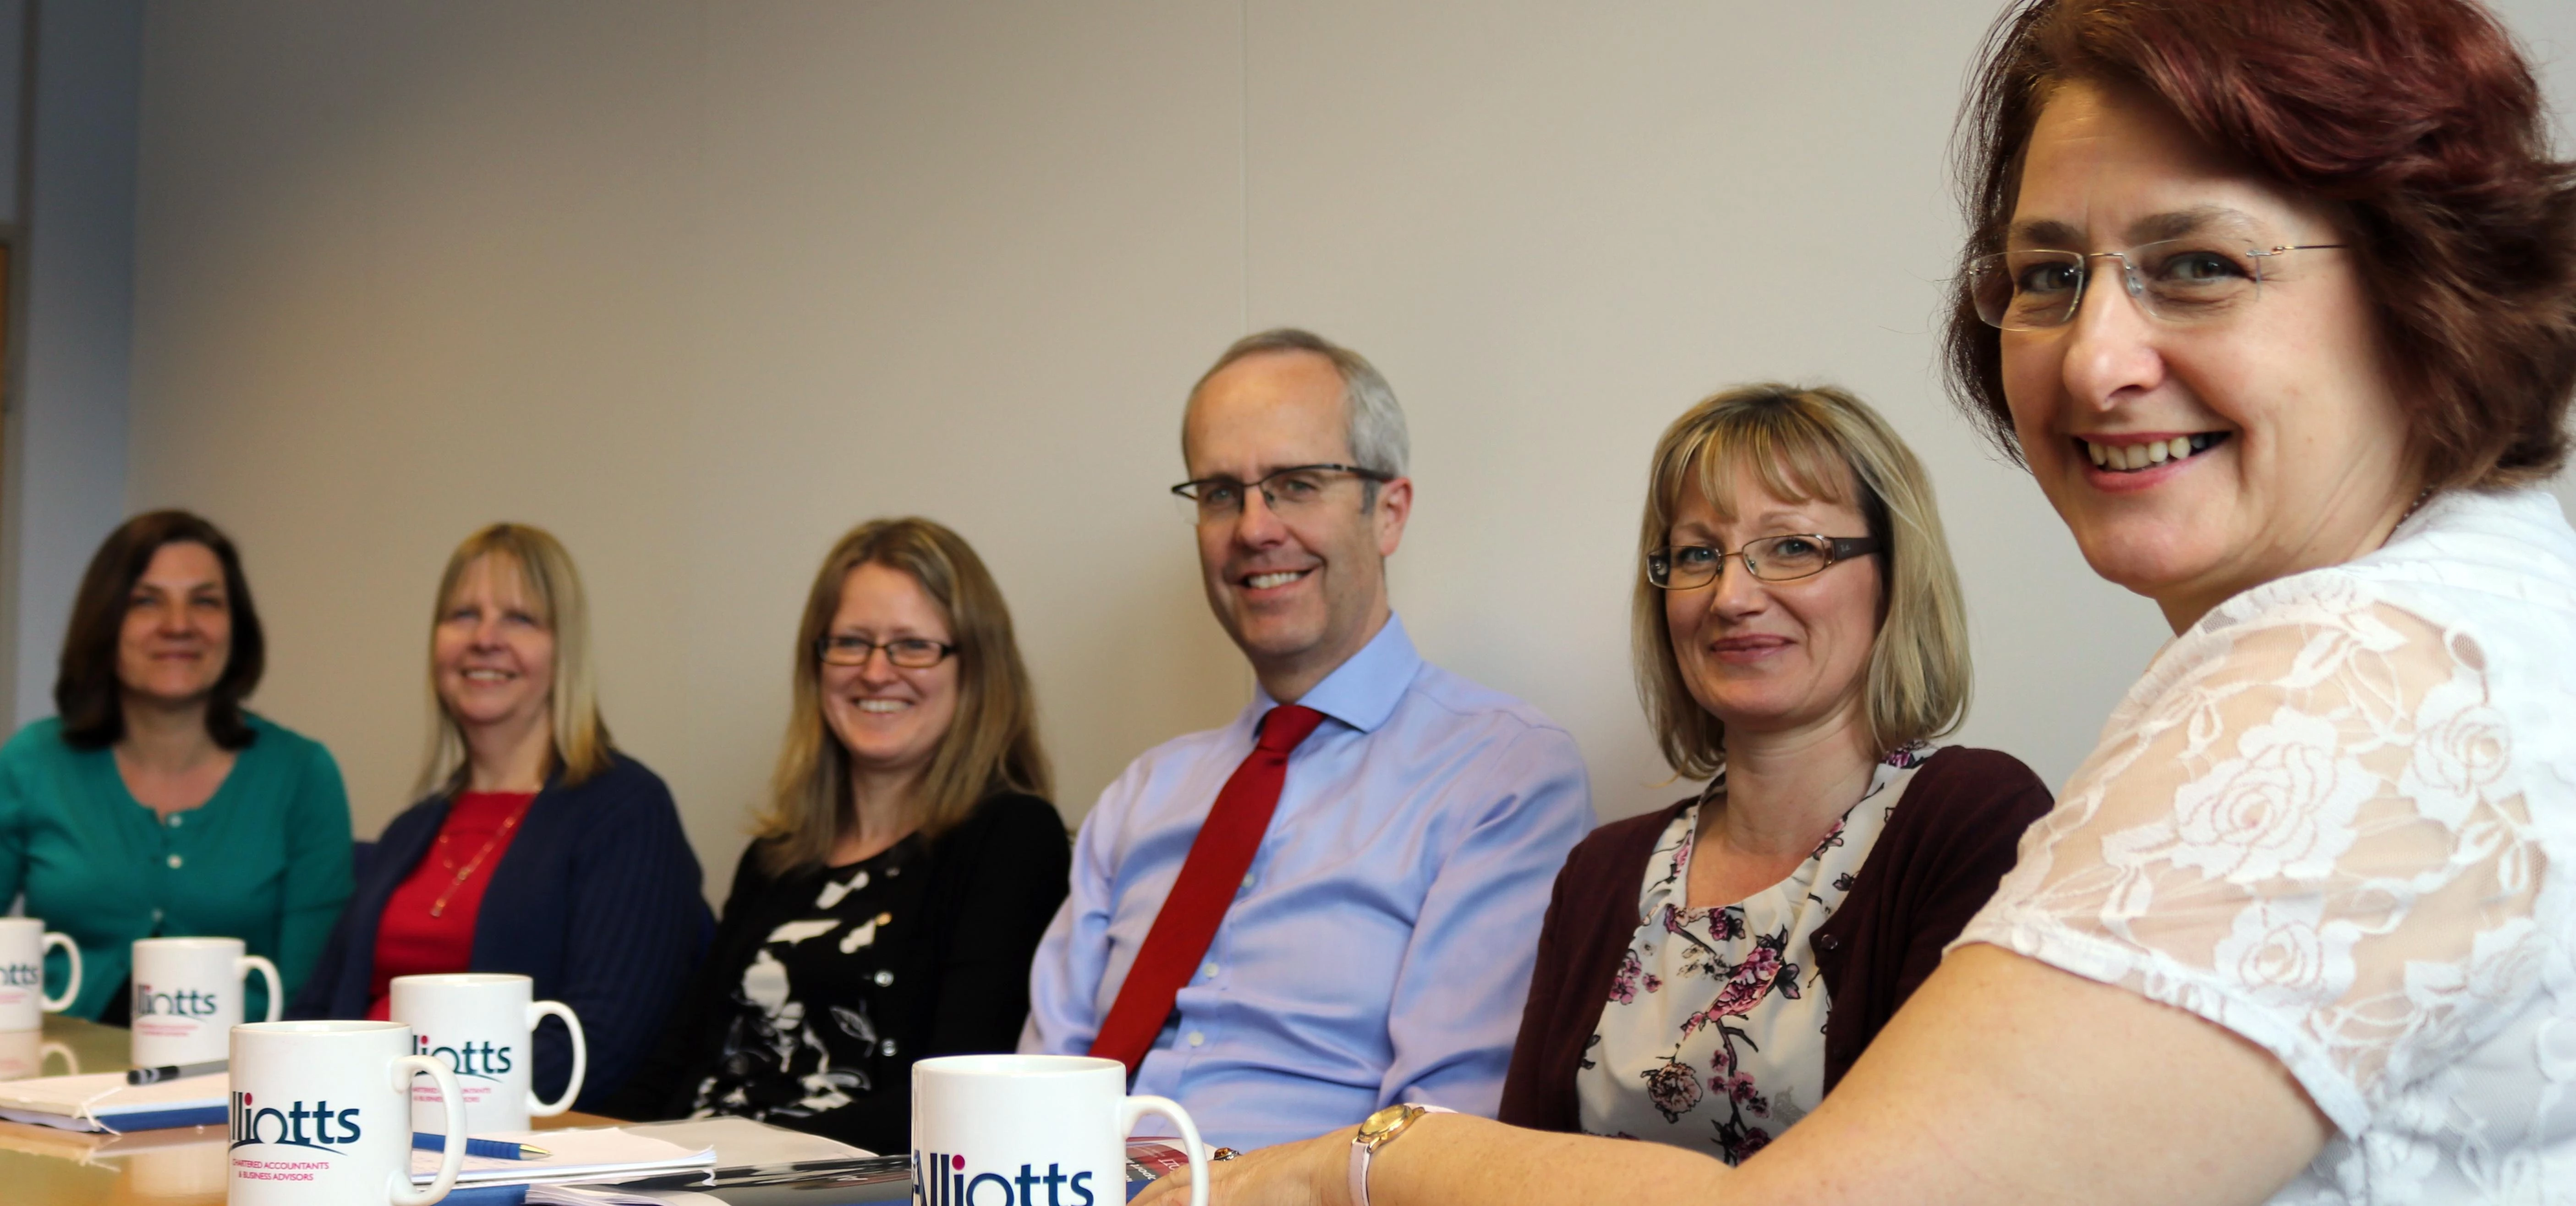 Delia Orme (far right) is joining Alliotts accountants as a new partner.  Pictured her with Steve Me